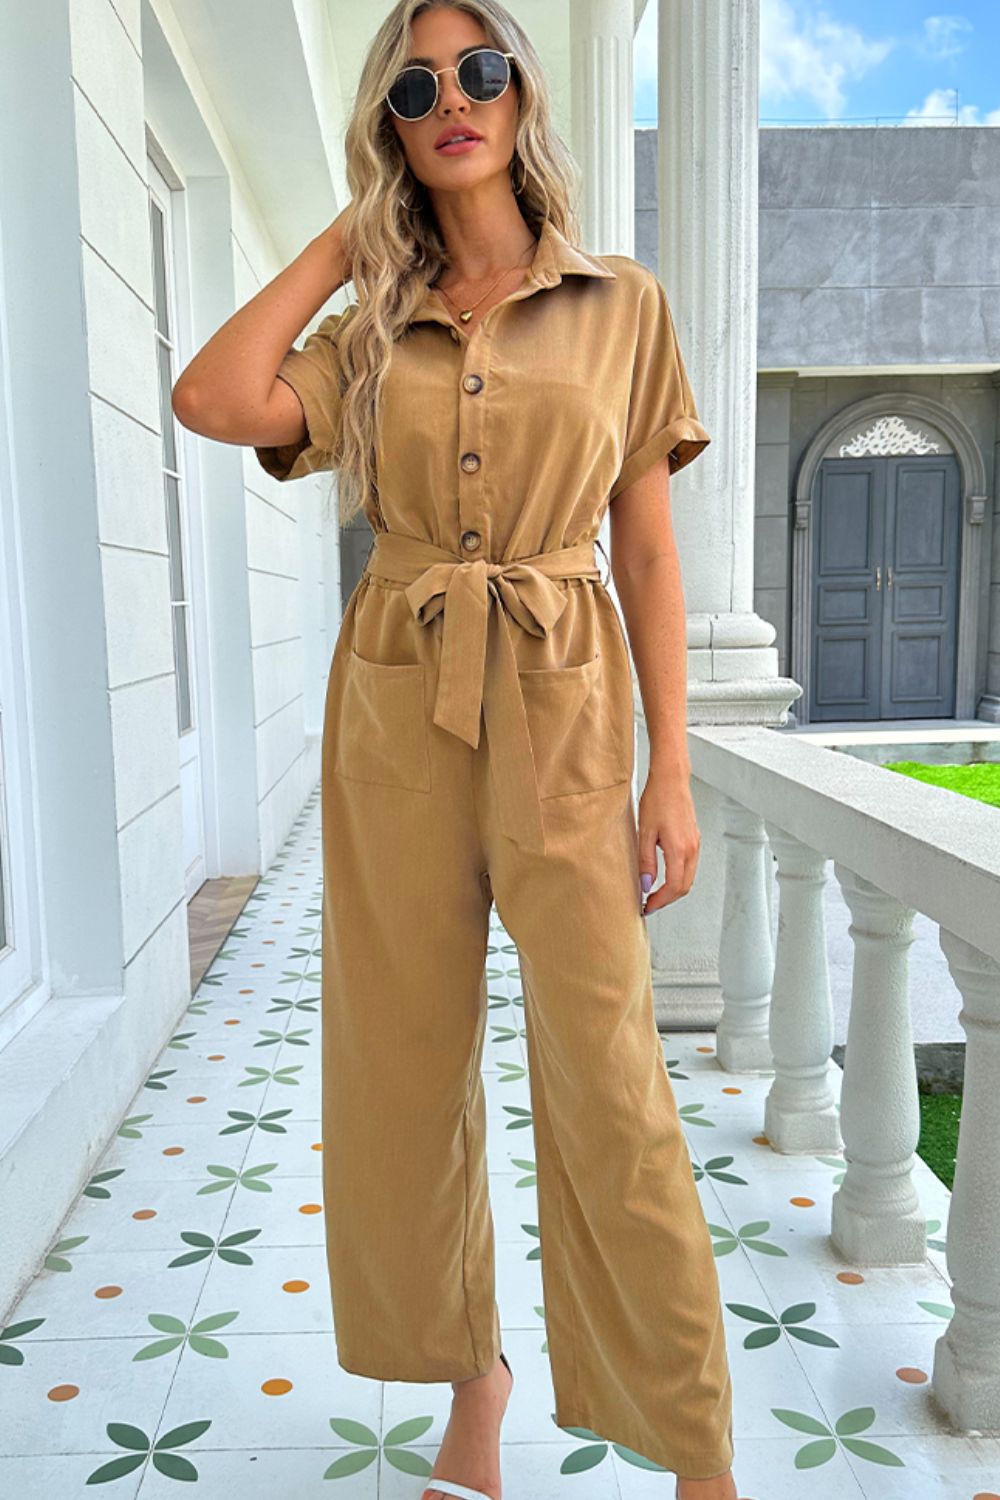 Tie Belt Buttoned Short Sleeve Collared Neck Jumpsuit - Jumpsuit - Wild Willows Boutique - Massapequa, NY, affordable and fashionable clothing for women of all ages. Bottoms, tops, dresses, intimates, outerwear, sweater, shoes, accessories, jewelry, active wear, and more // Wild Willow Boutique.